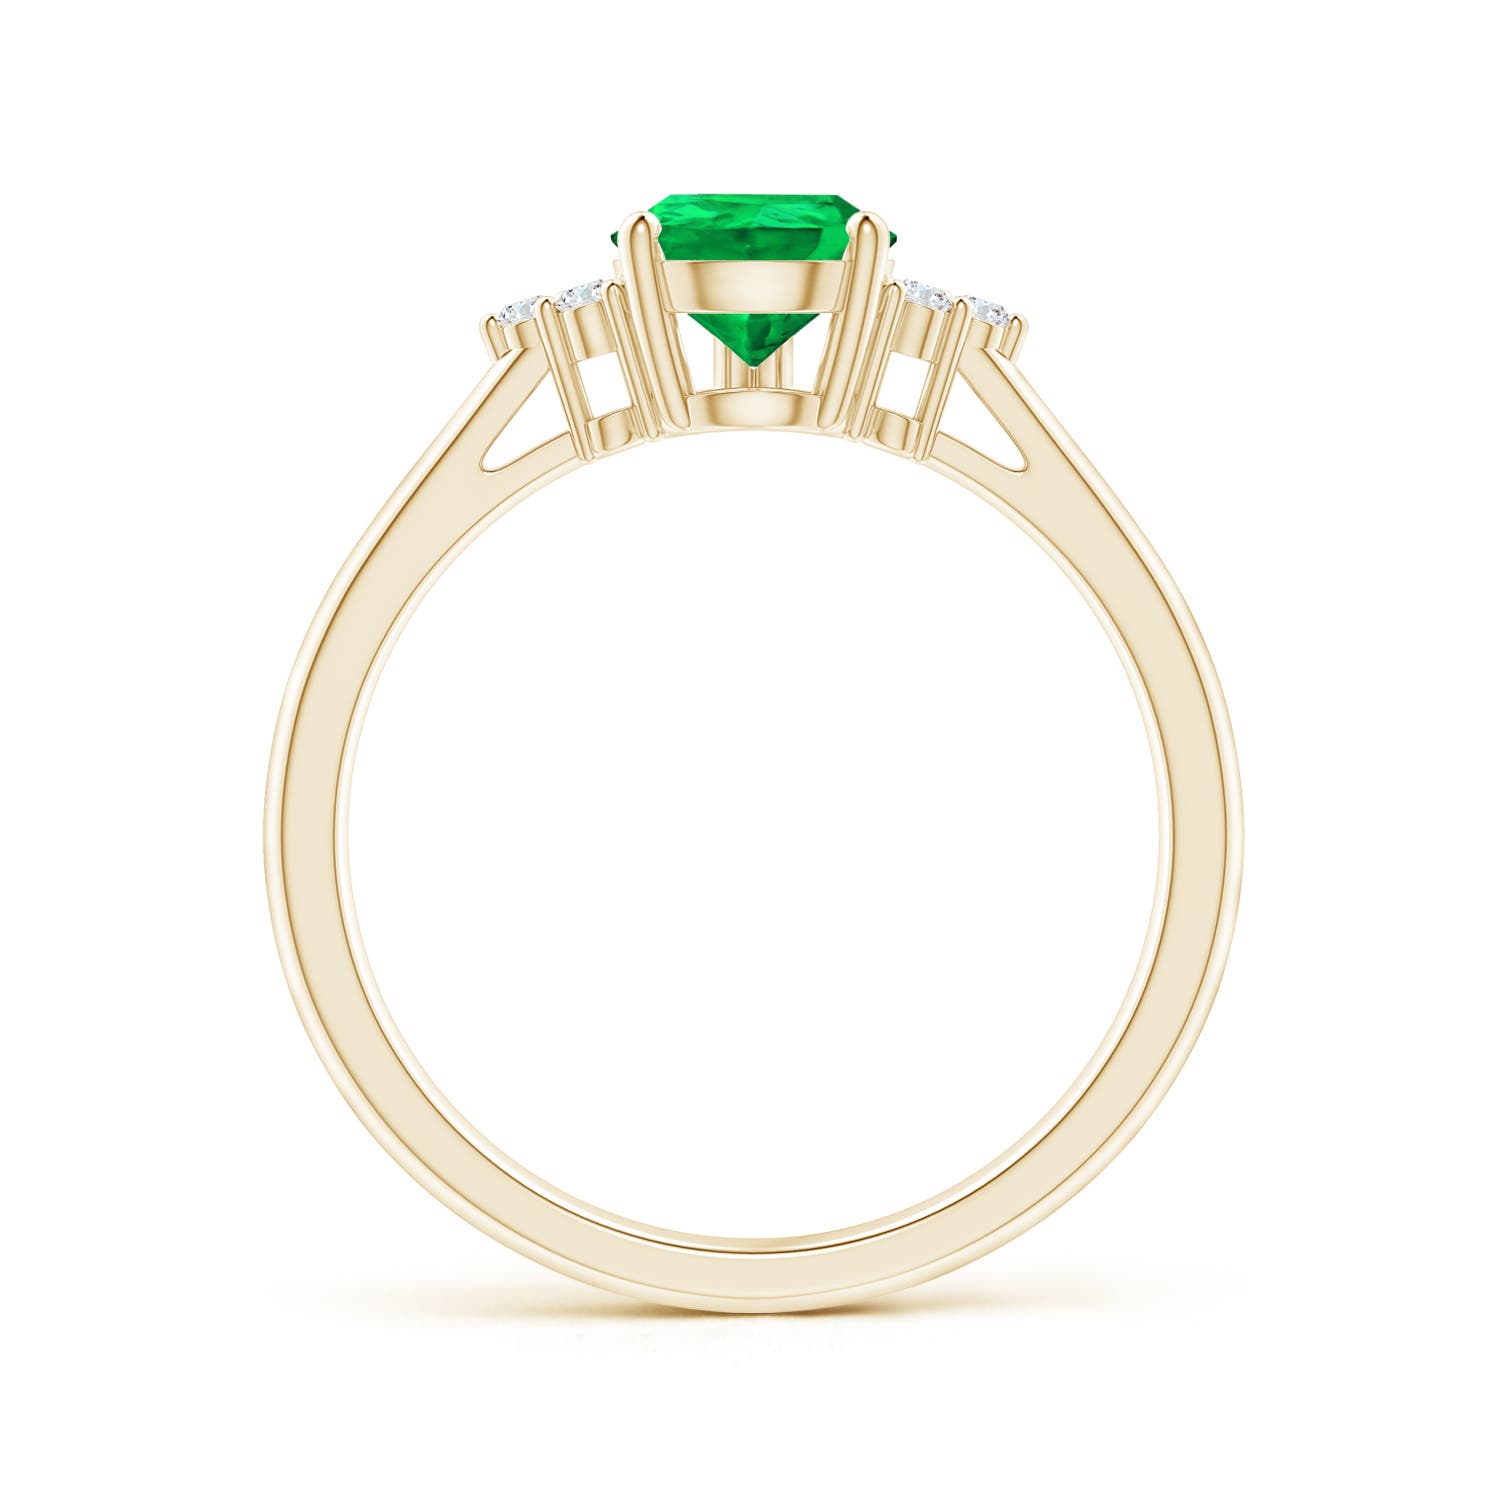 AAA - Emerald / 1.02 CT / 14 KT Yellow Gold